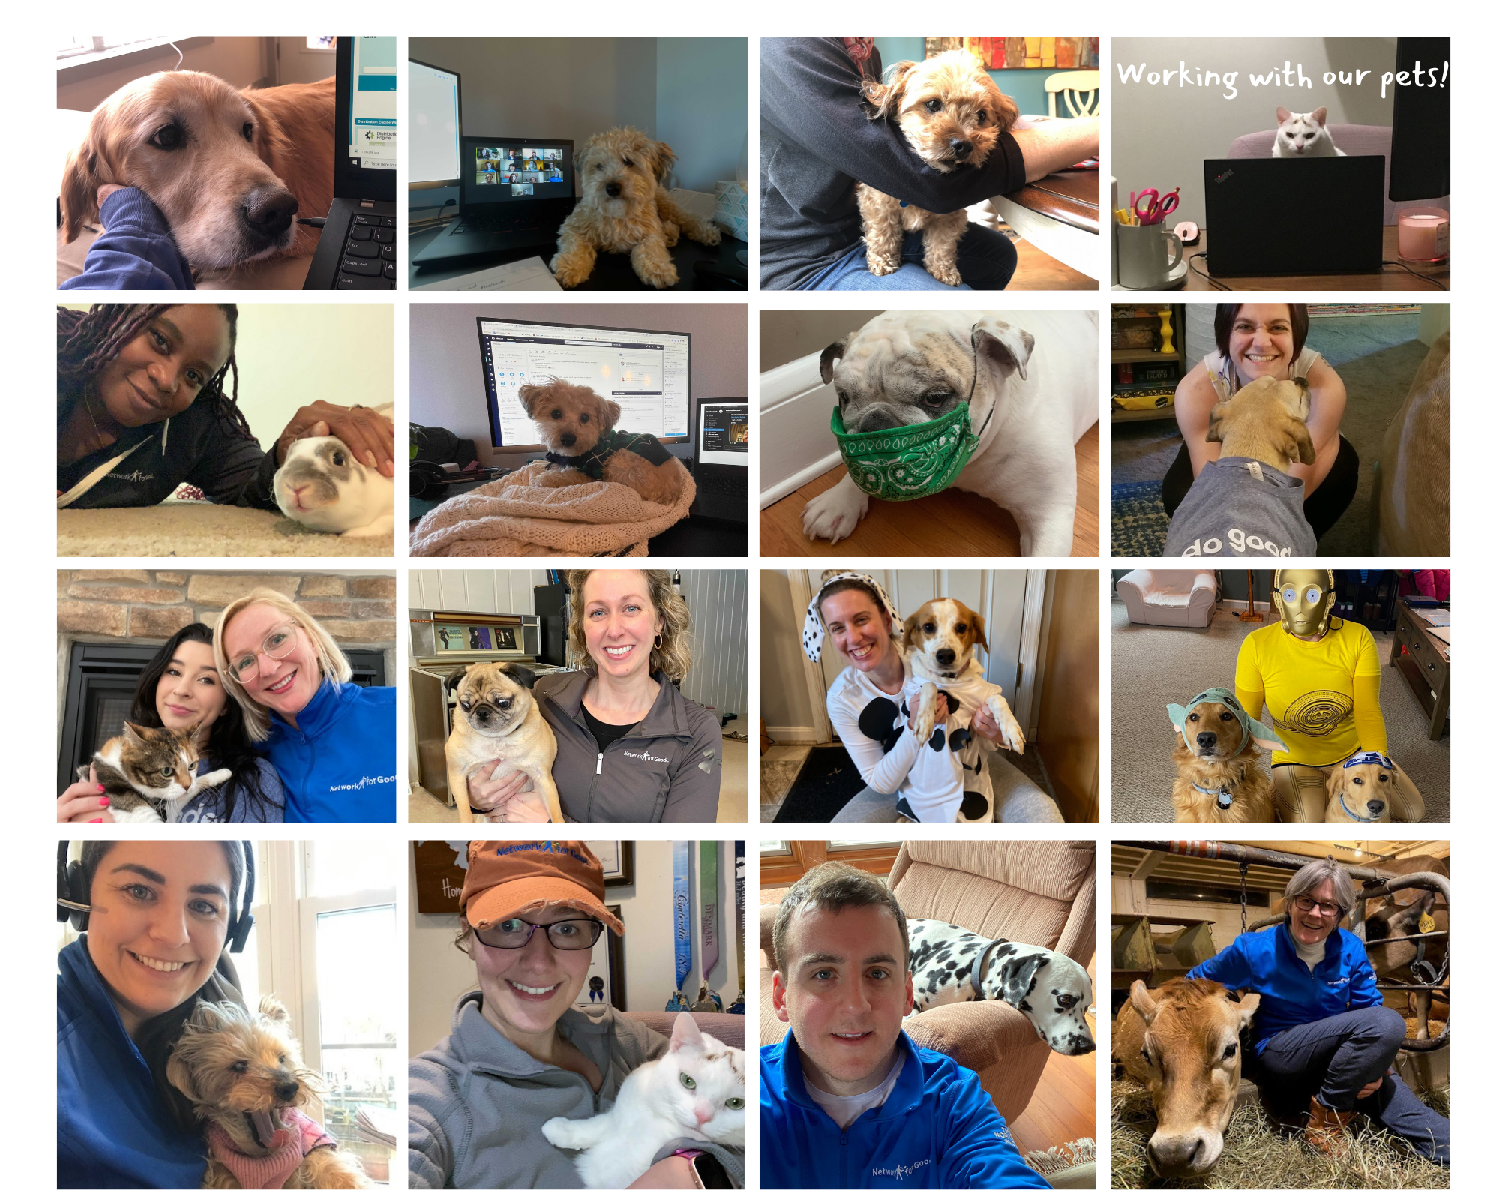 In 2020, Network for Good employees adjusted to working from home. There are some perks, such as working with our pets!